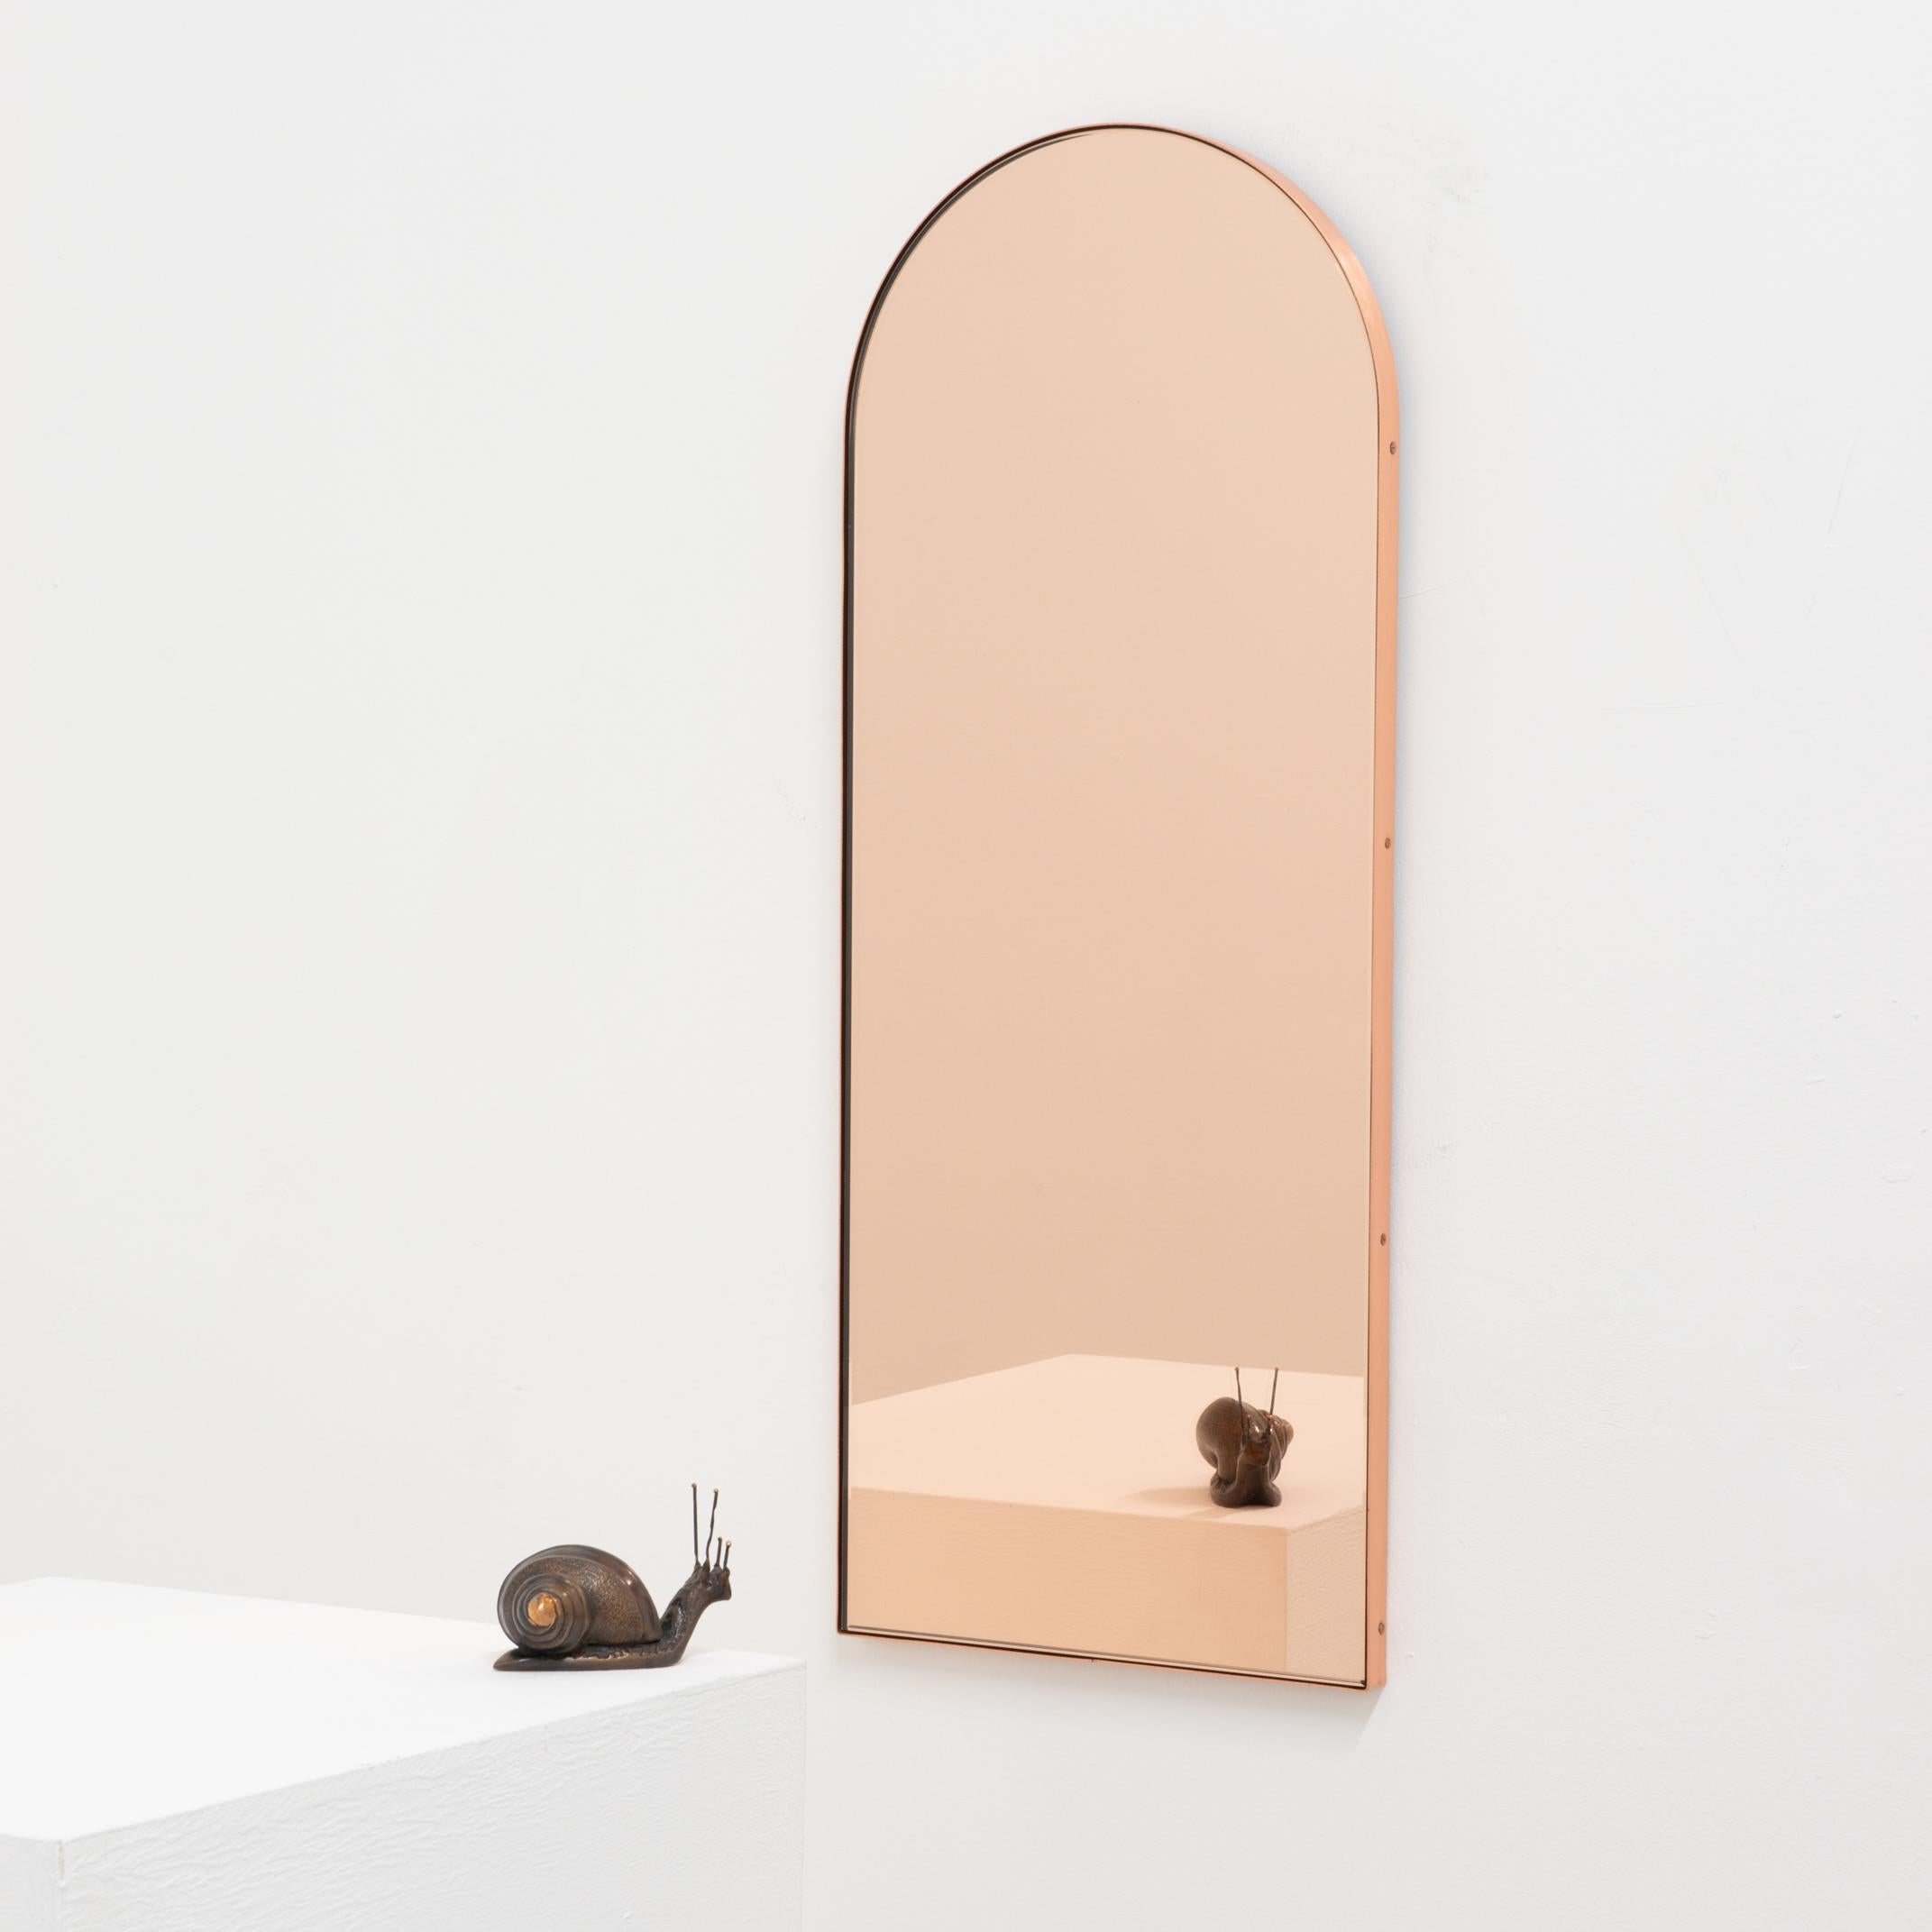 In Stock Arcus Arched Peach Contemporary Mirror with Copper Frame, Small 2